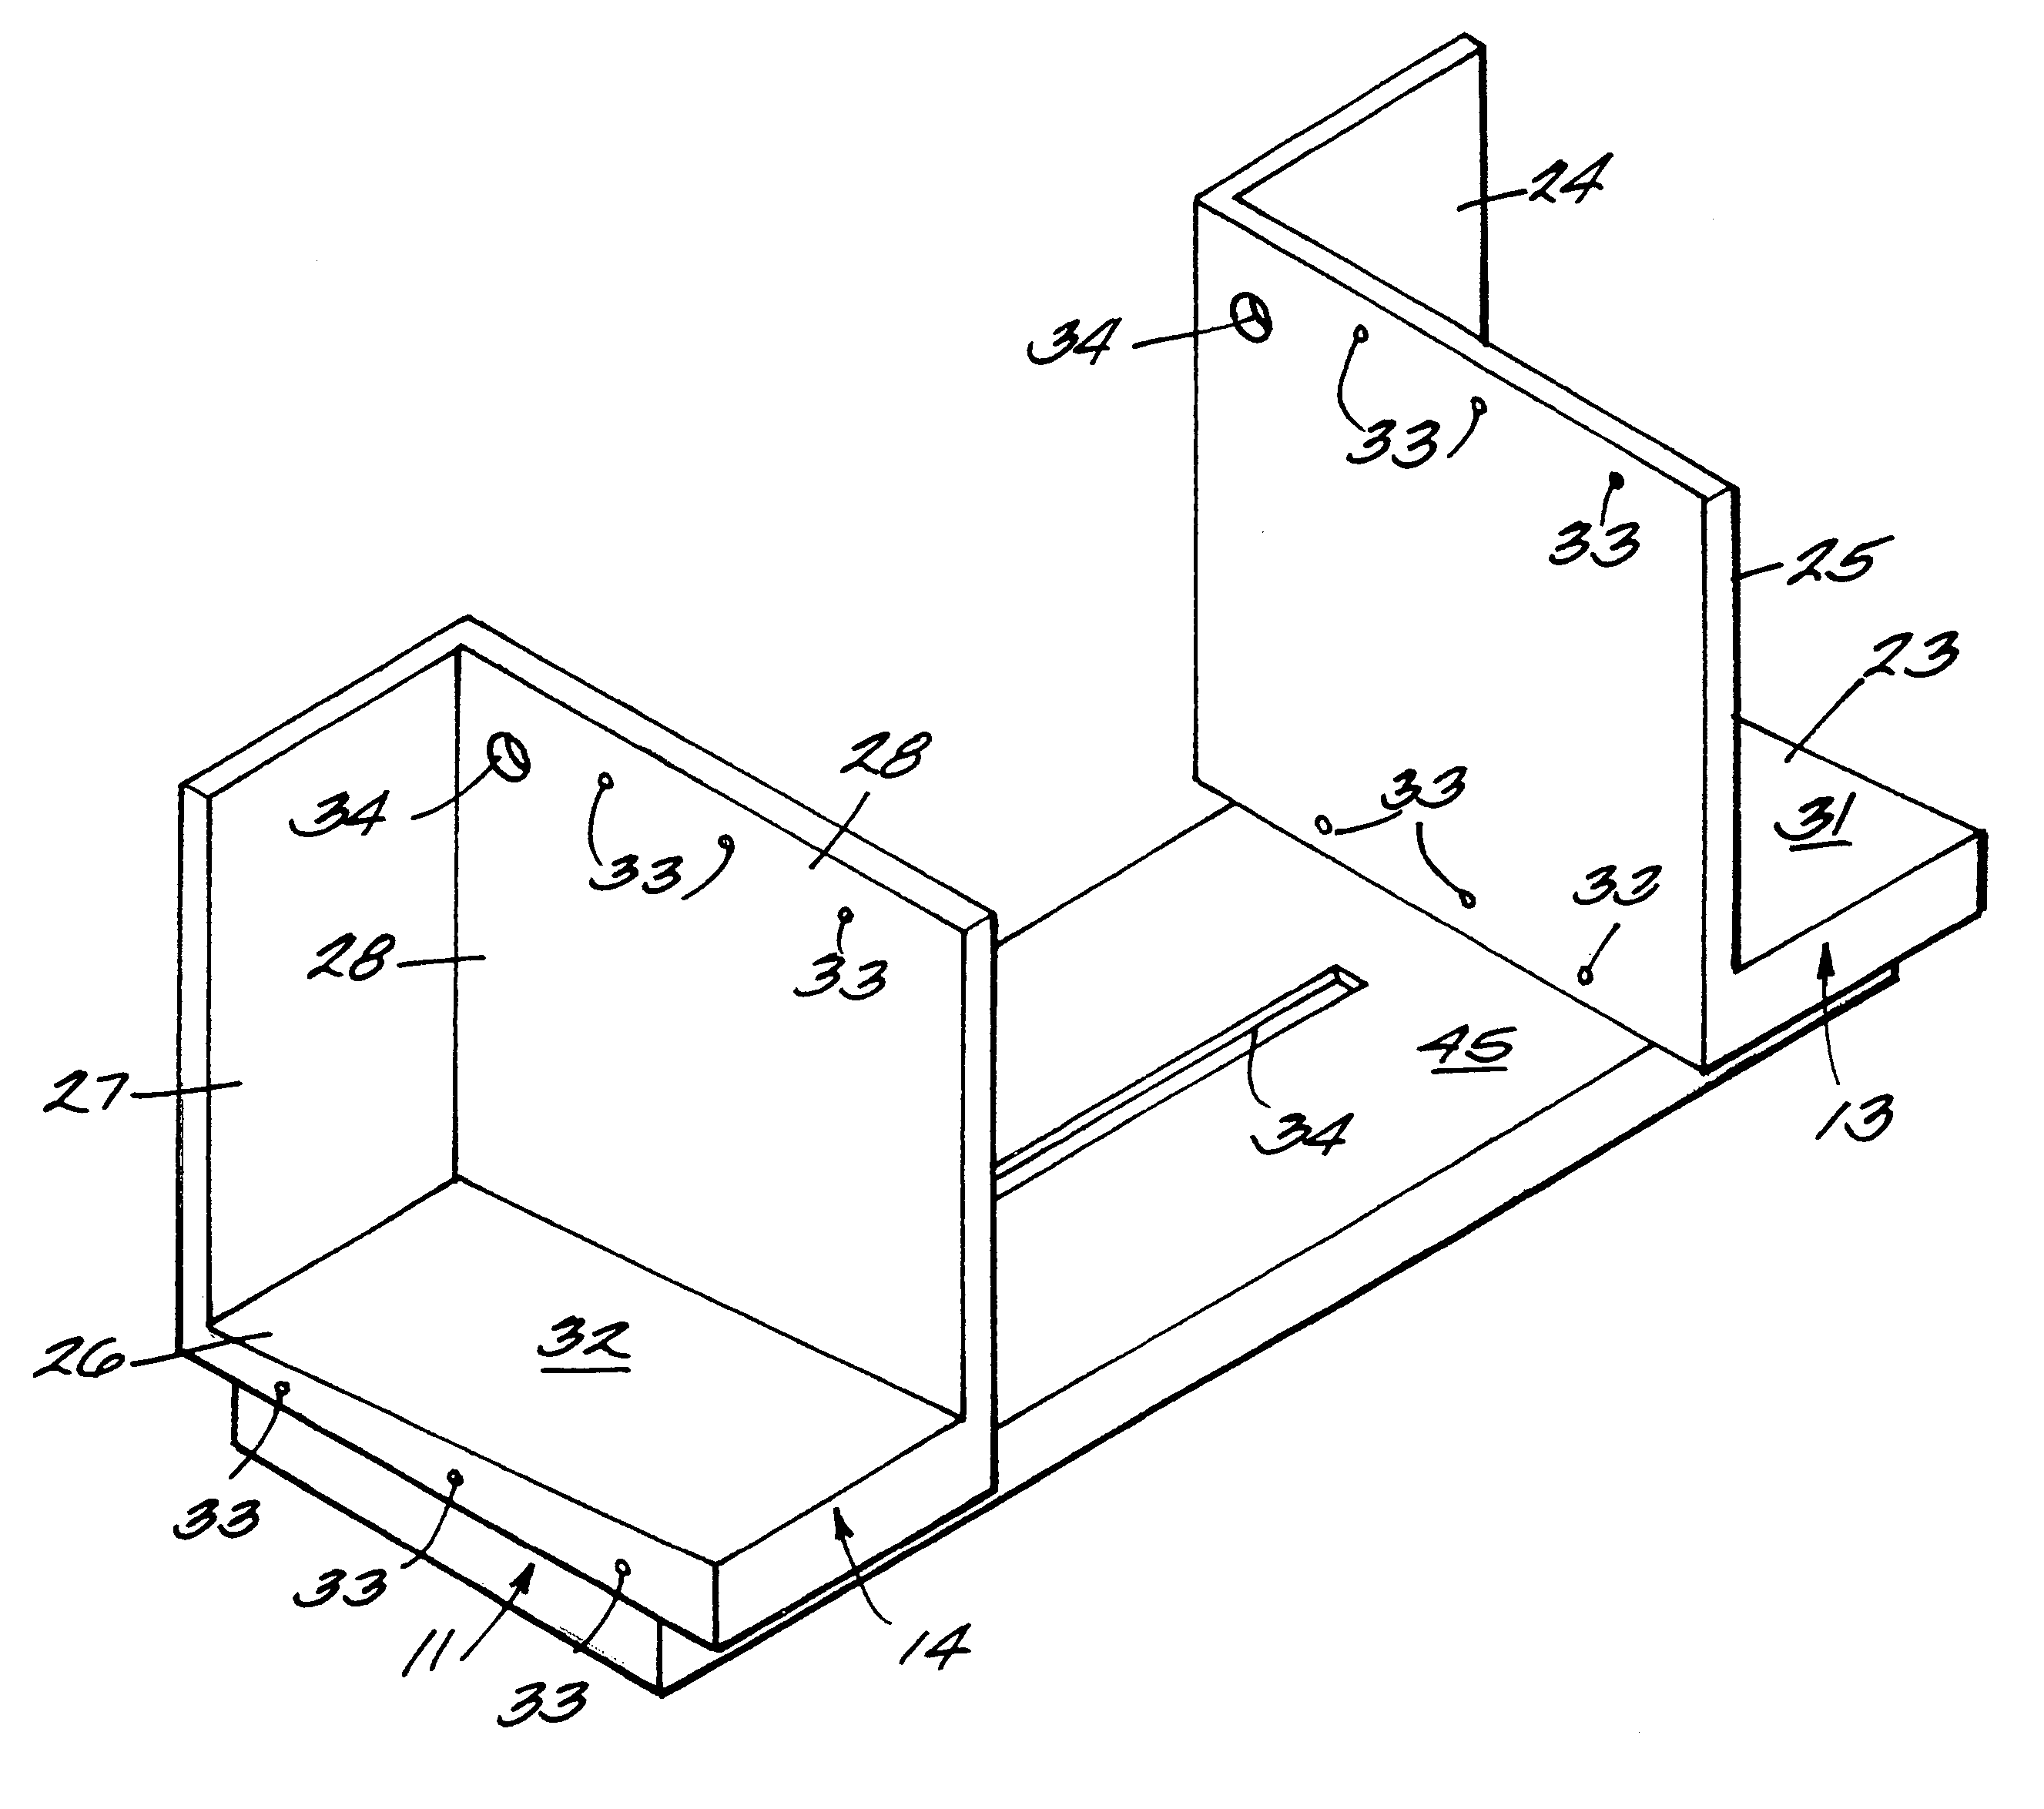 Multiple configuration shelving system for displaying audio visual components